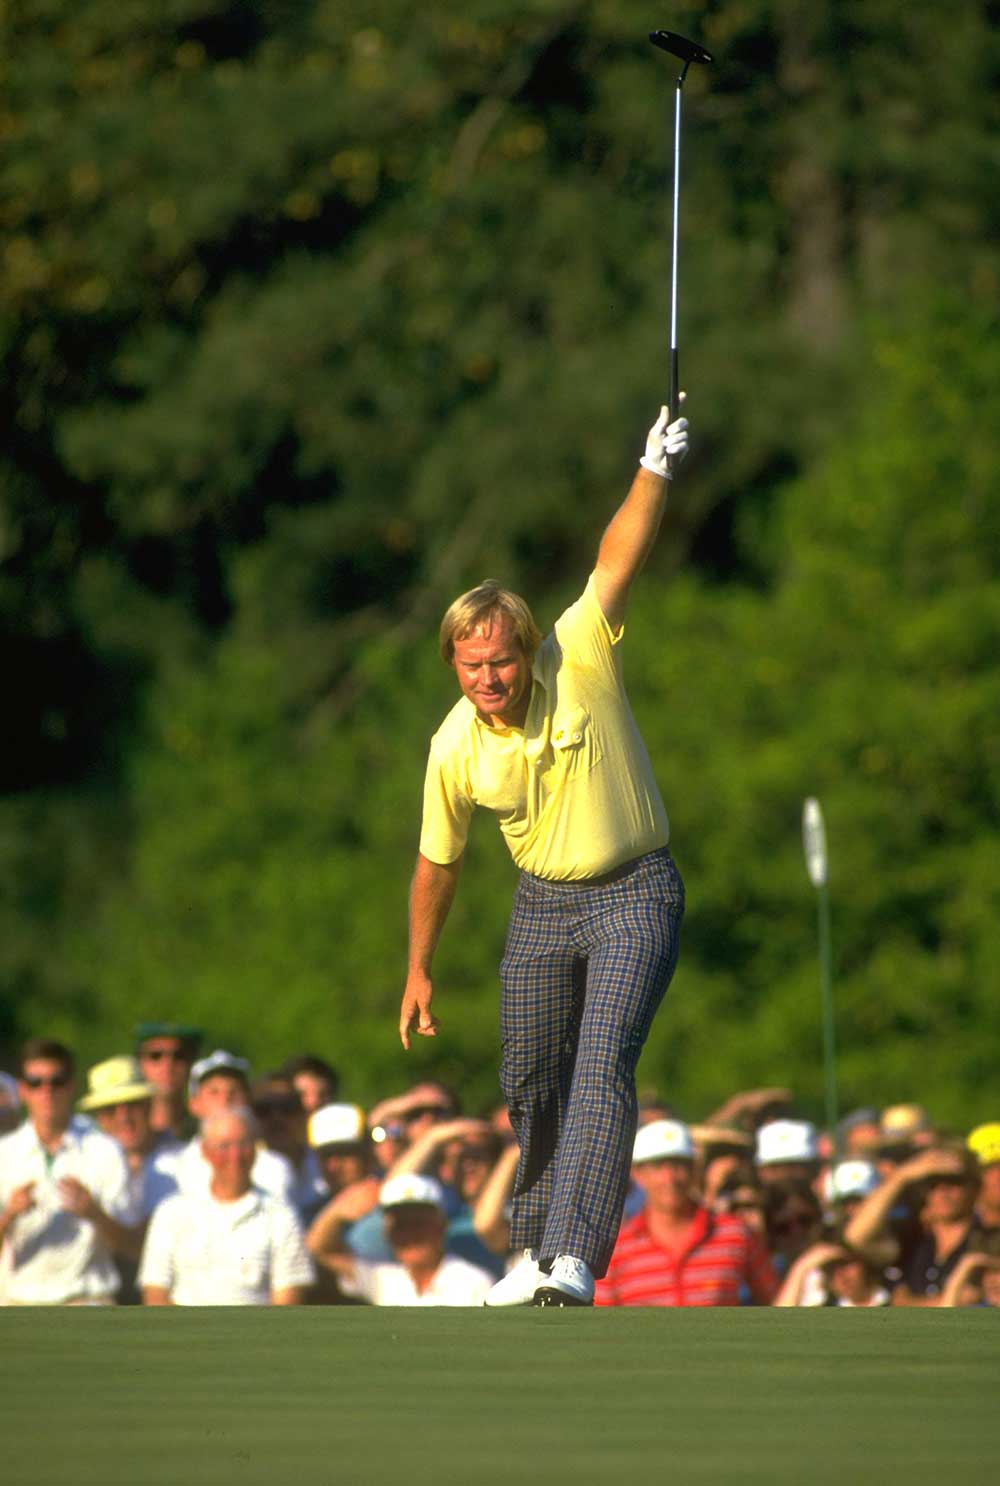 Jack Nicklaus' 1986 Masters victory is still believed to be among his greatest of his 18 majors.